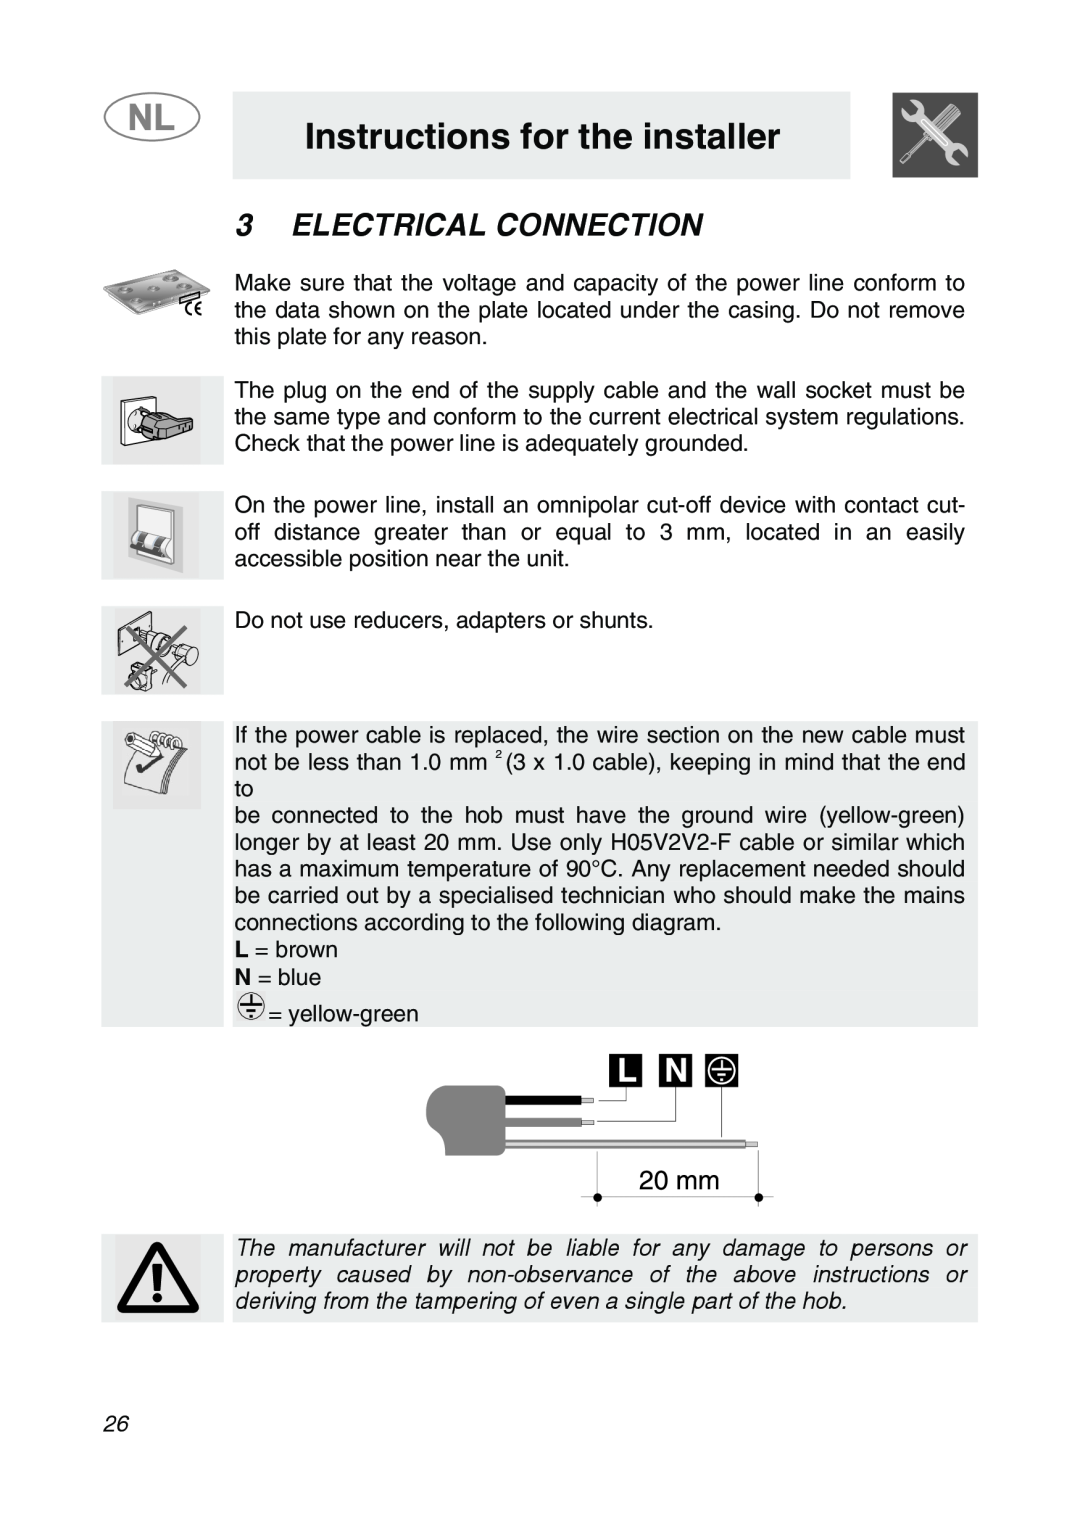 Smeg GKCO755, GKC755 manual Electrical Connection, Instructions for the installer 